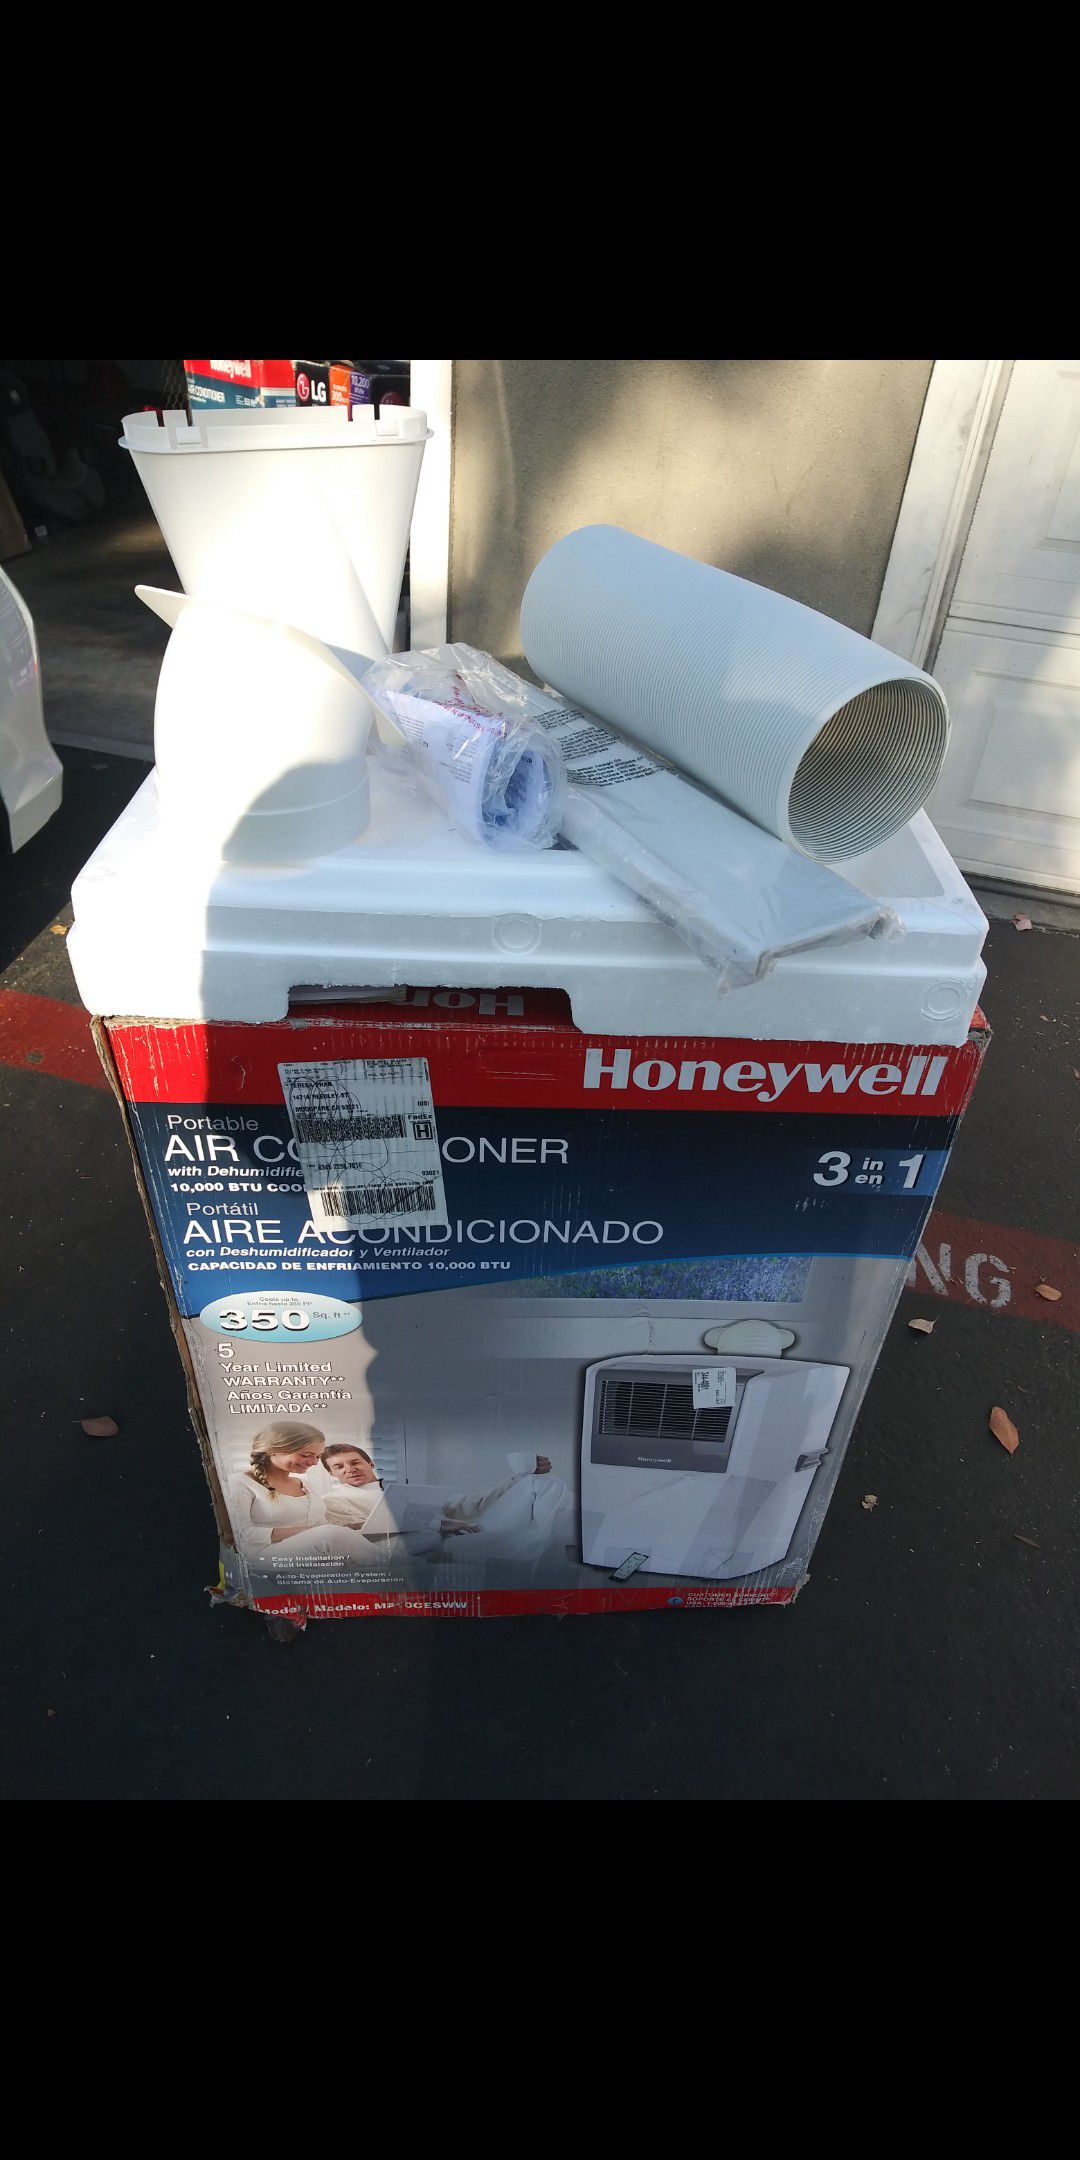 New Honeywell 10,000 BTU Portable Air Conditioner up to 350 sq. ft.  $210